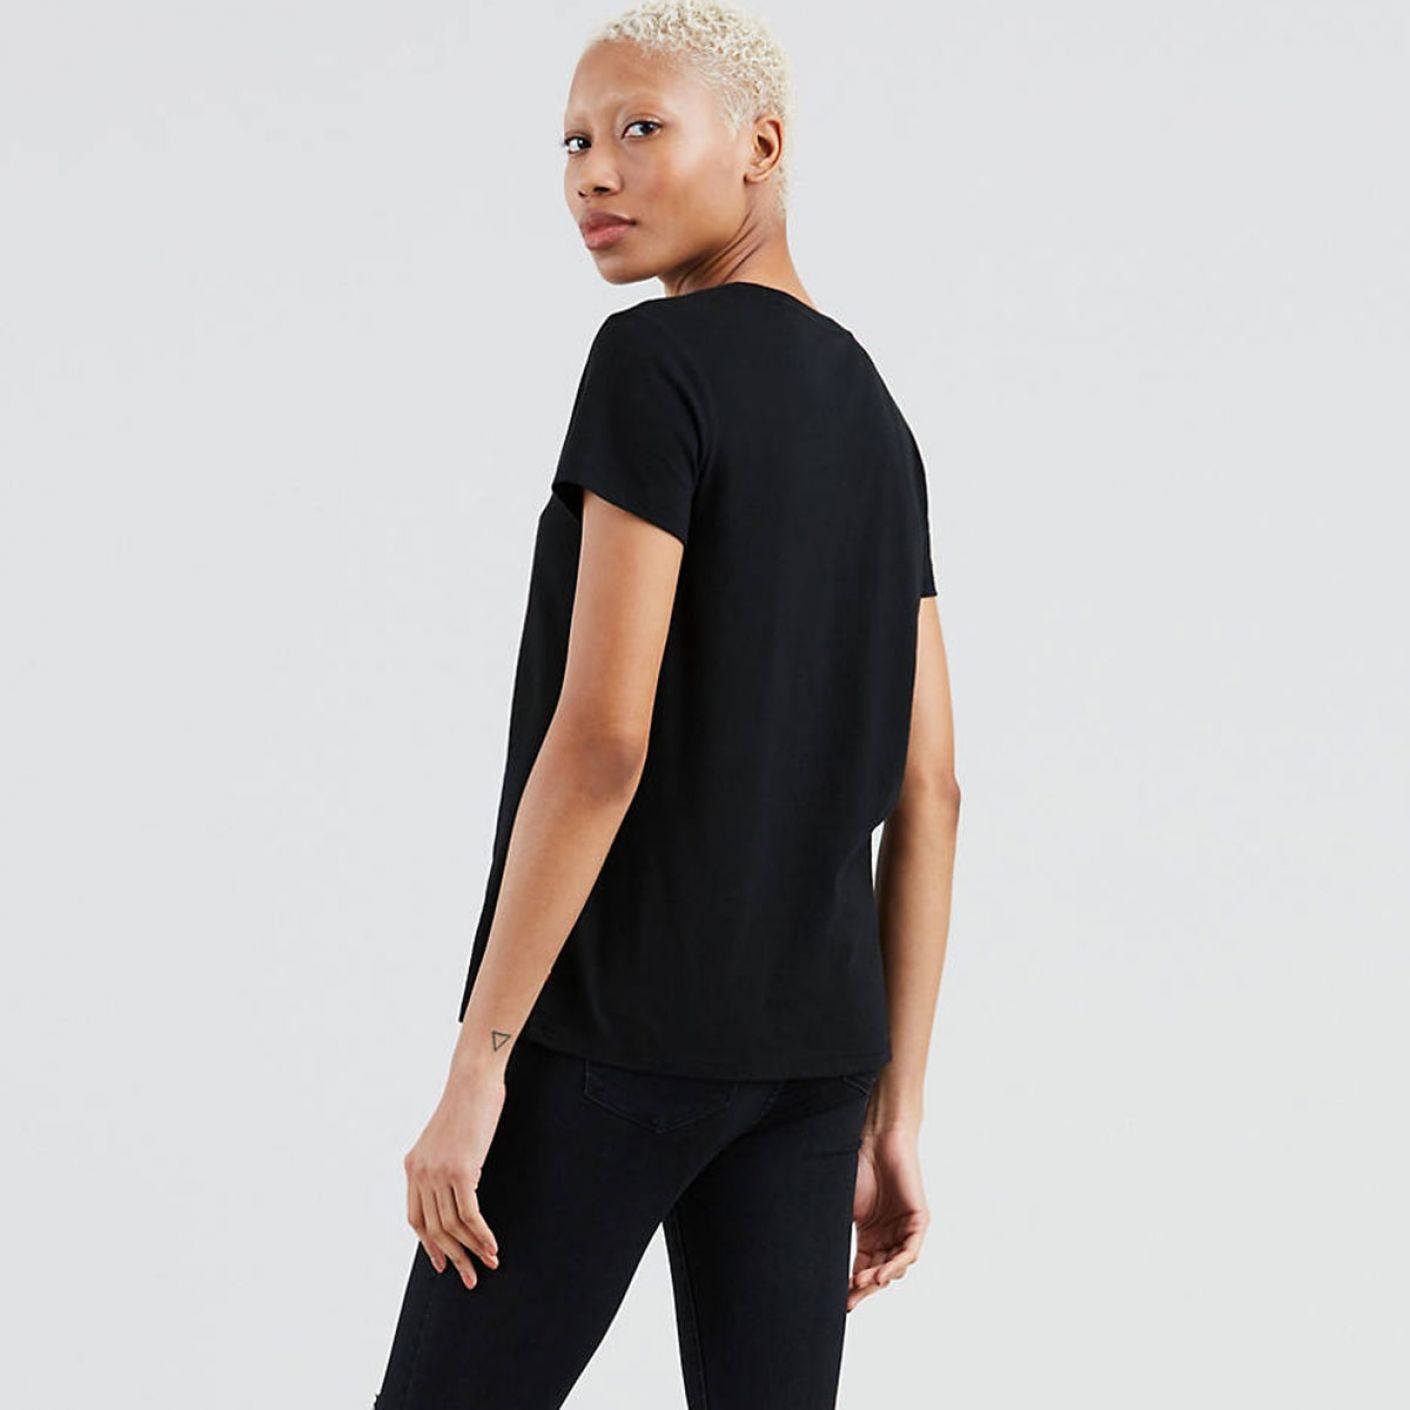 Levis T-Shirt The Perfect Black-Silver